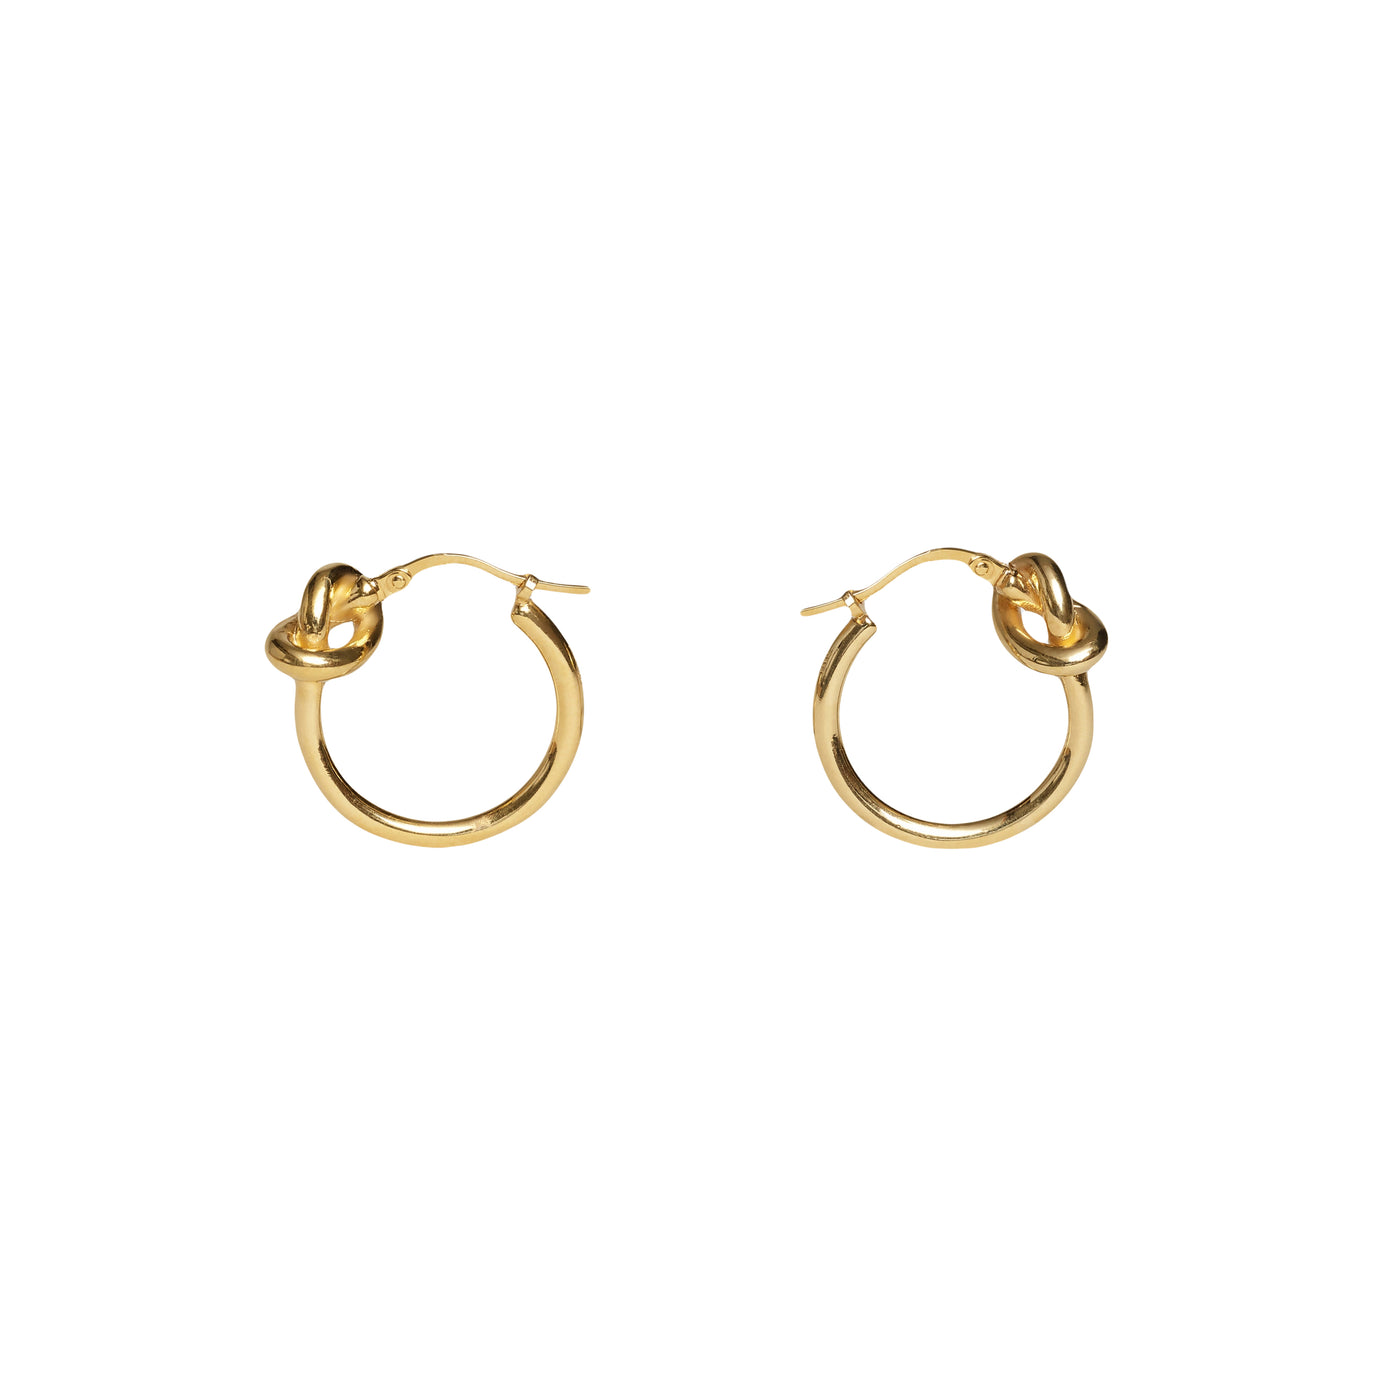 CELINE Knot Small Hoops current RRP: £355